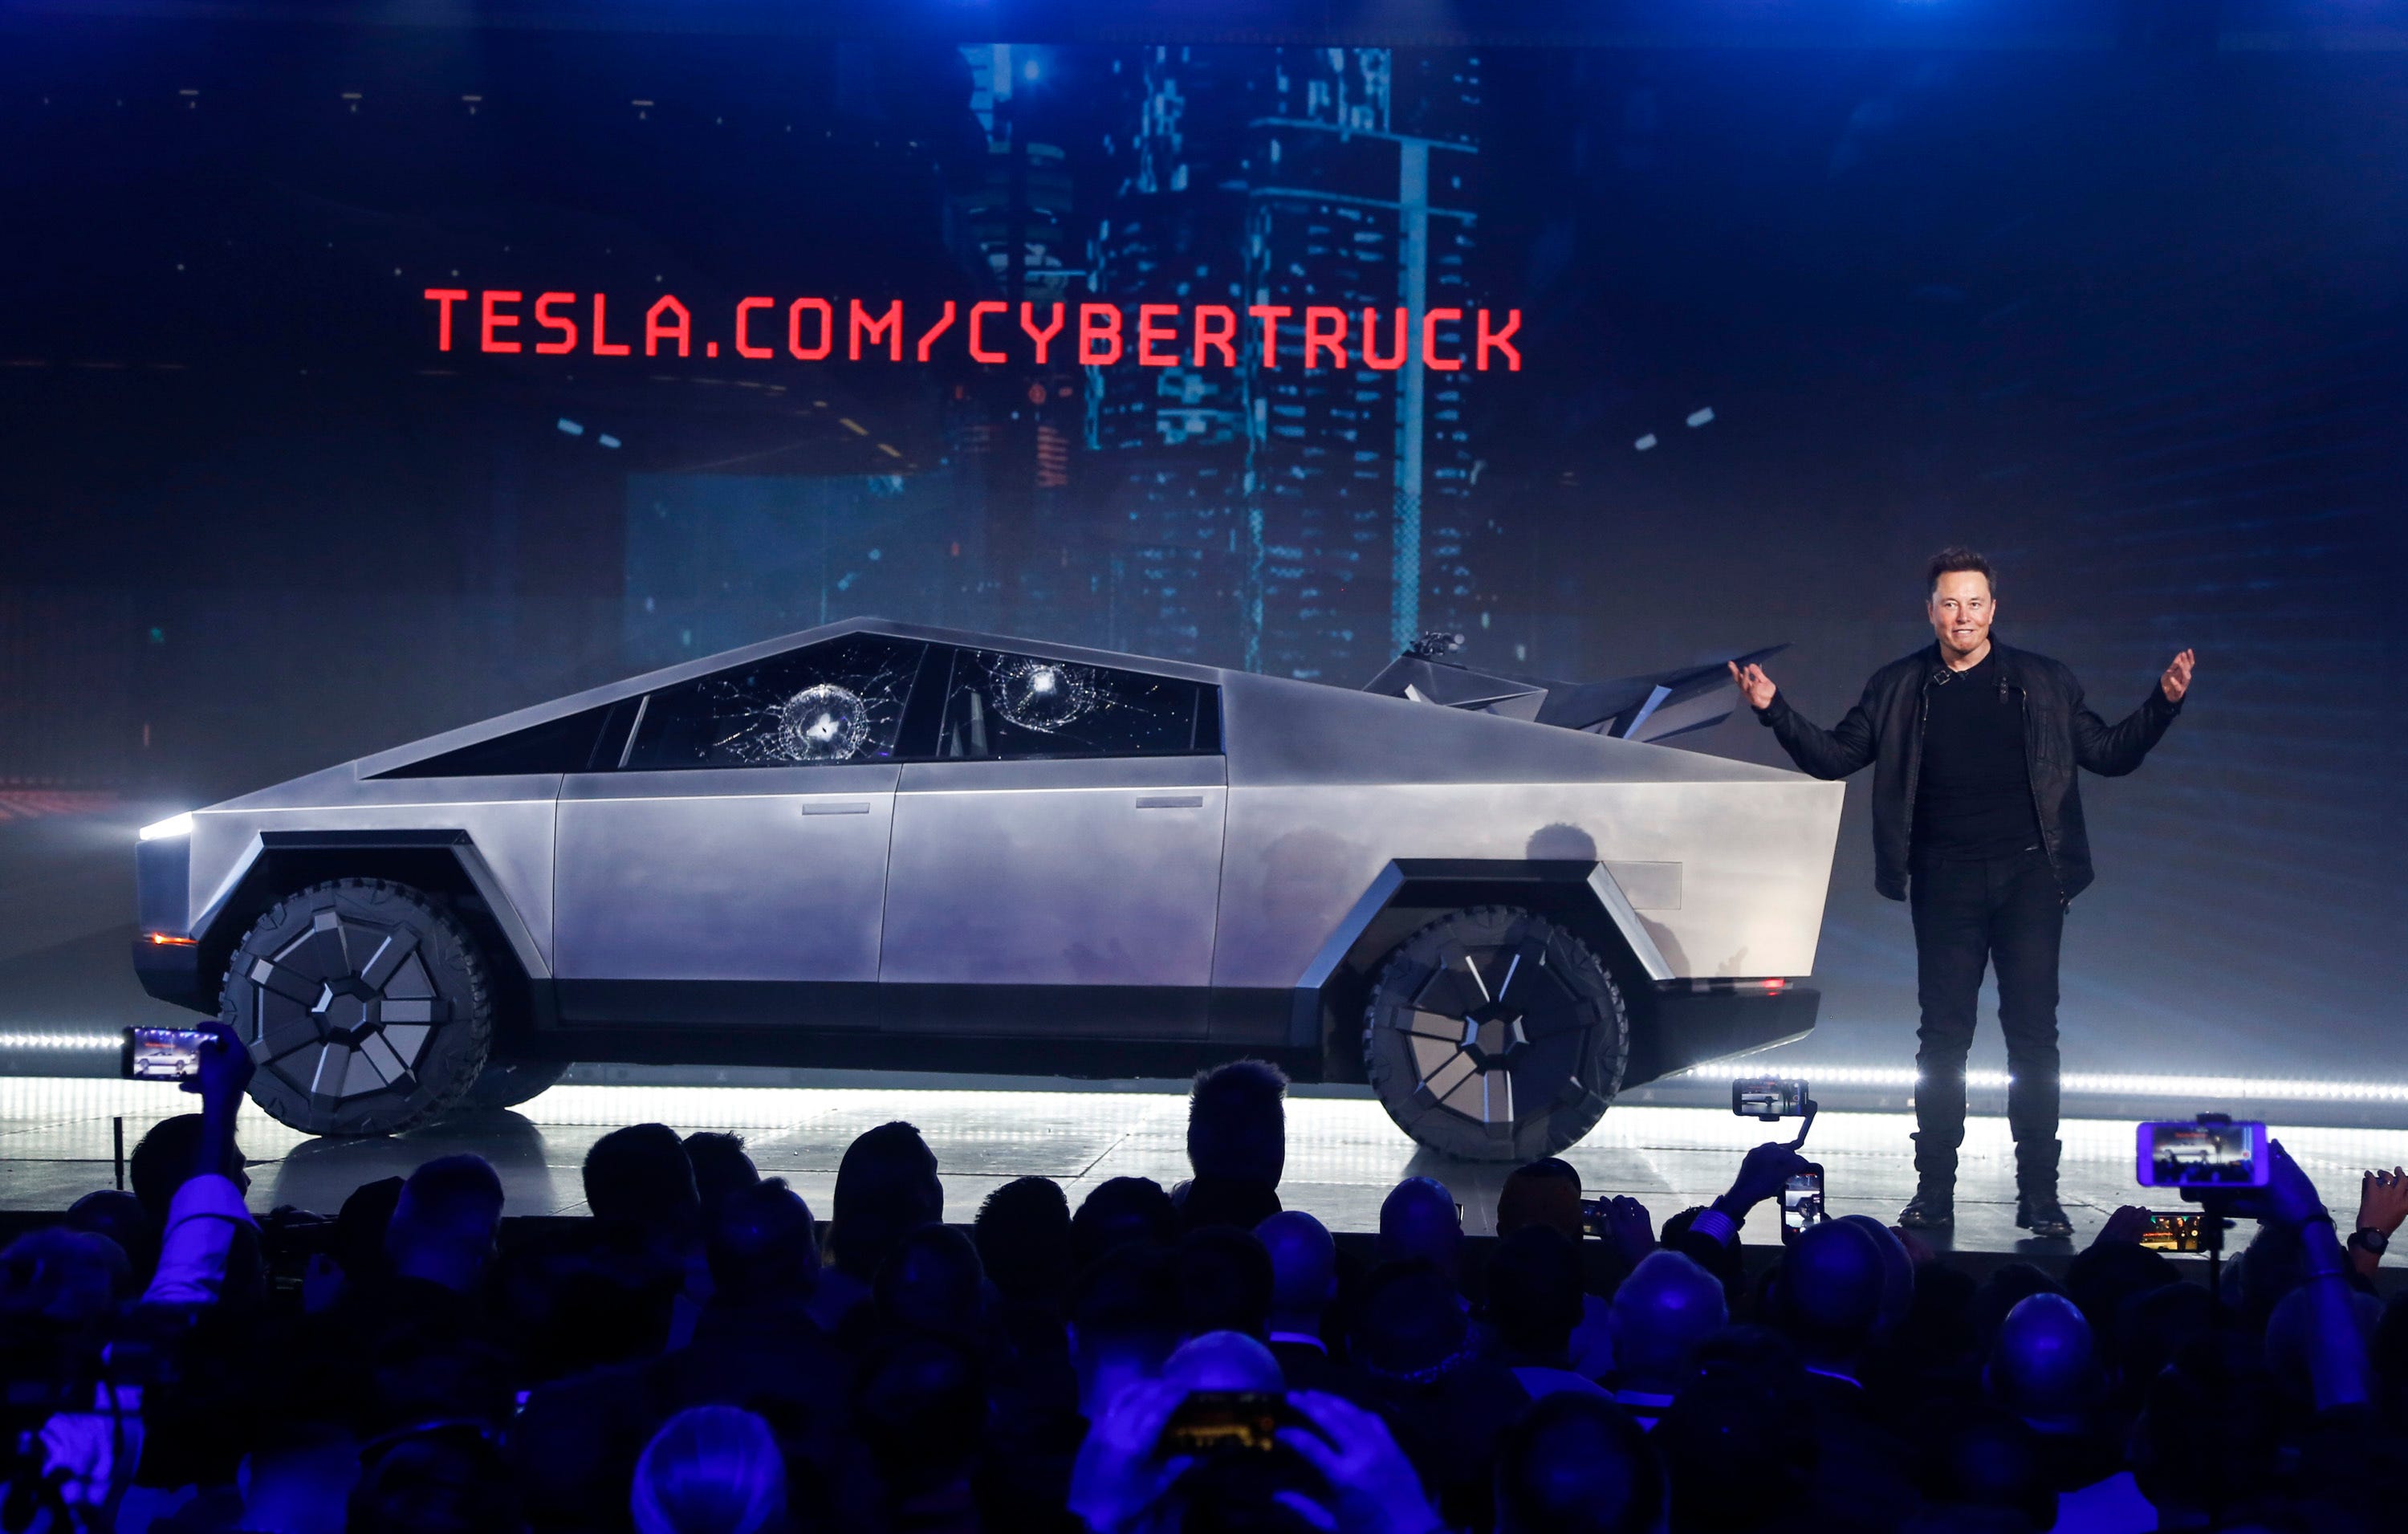 Tesla CEO Elon Musk introduces the Cybertruck at Tesla's design studio Thursday, Nov. 21, 2019, in Hawthorne, Calif. Musk is taking on the workhorse heavy pickup truck market with his latest electric vehicle.